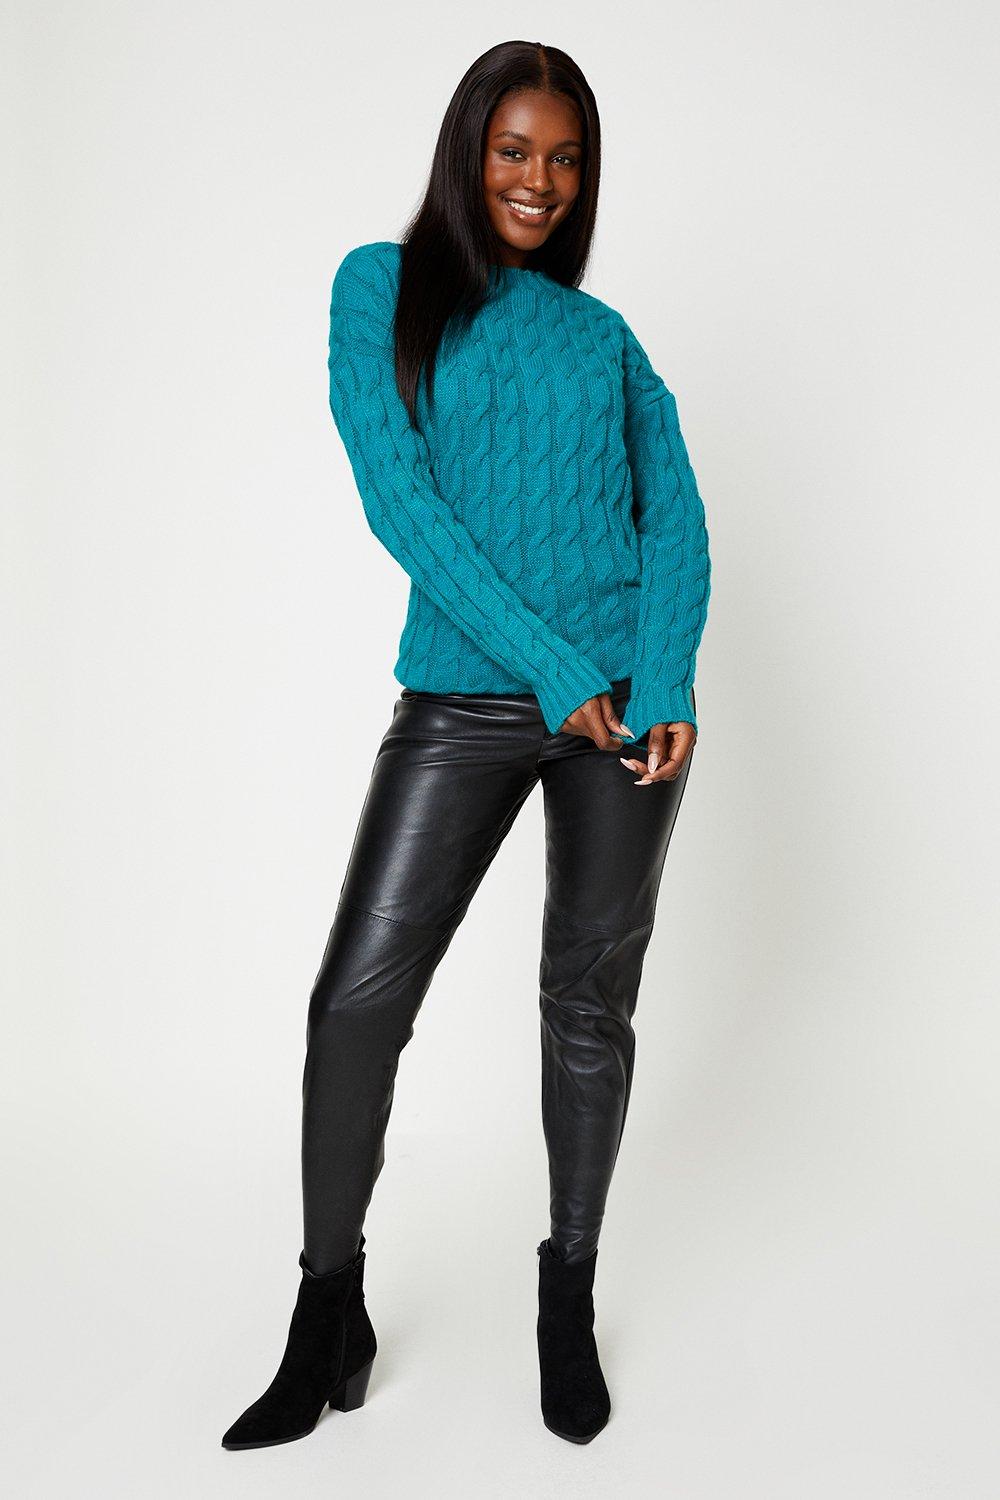 Women’s Long Sleeve Cable Knit Jumper - green - L